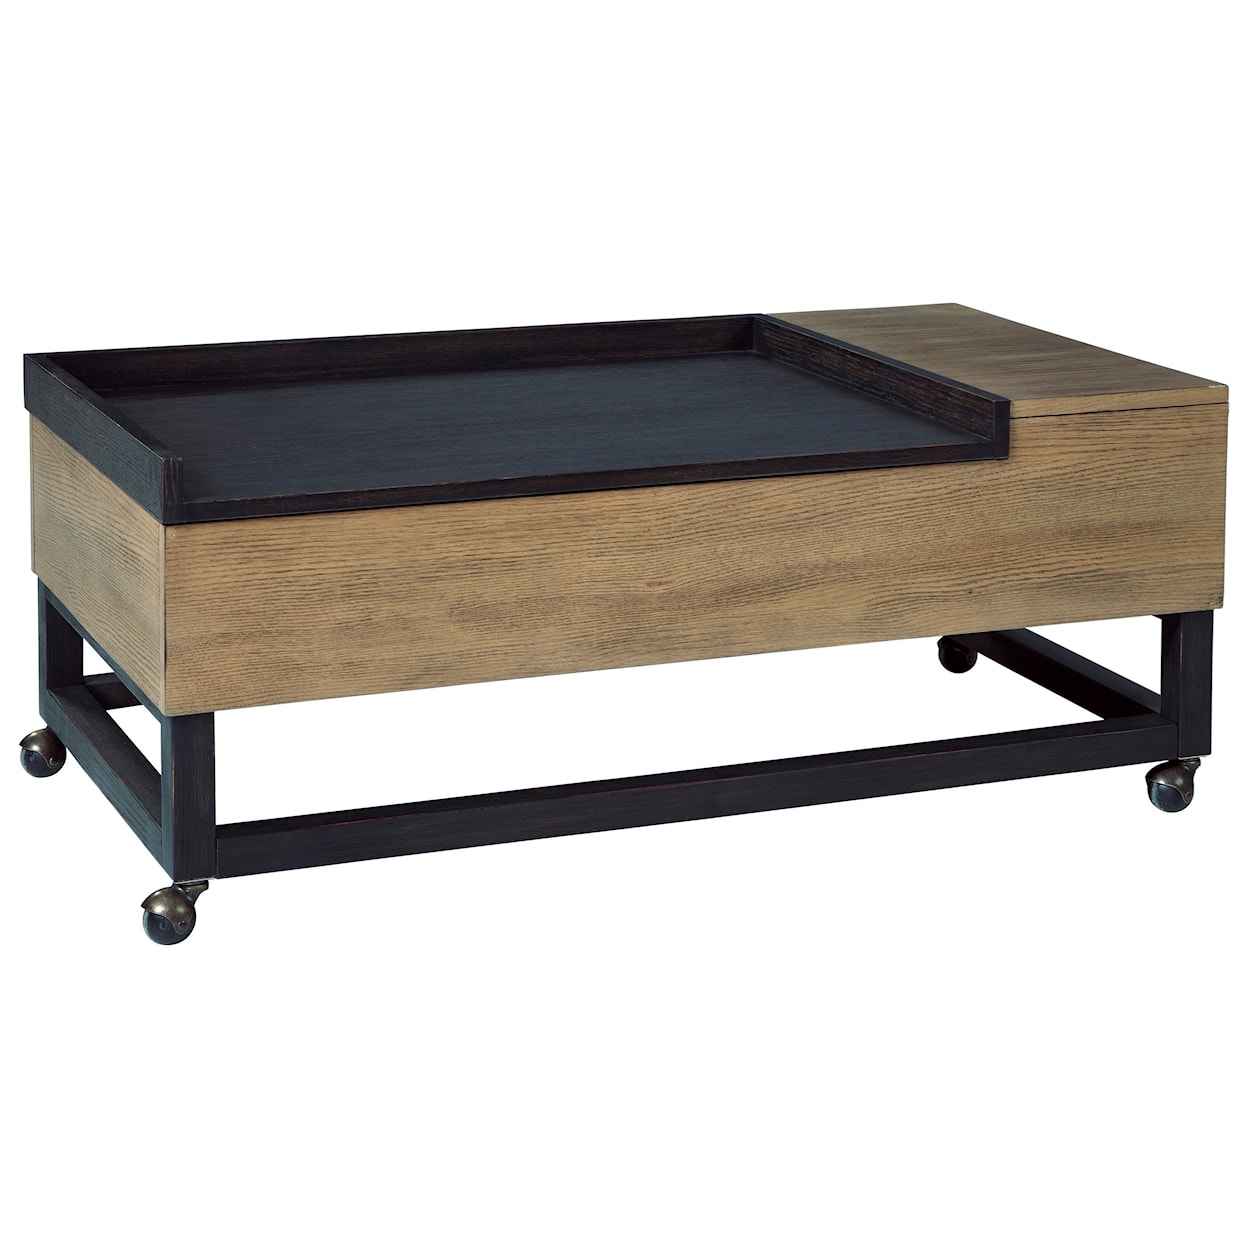 Belfort Select Fridley T920 Lift Top Cocktail Table